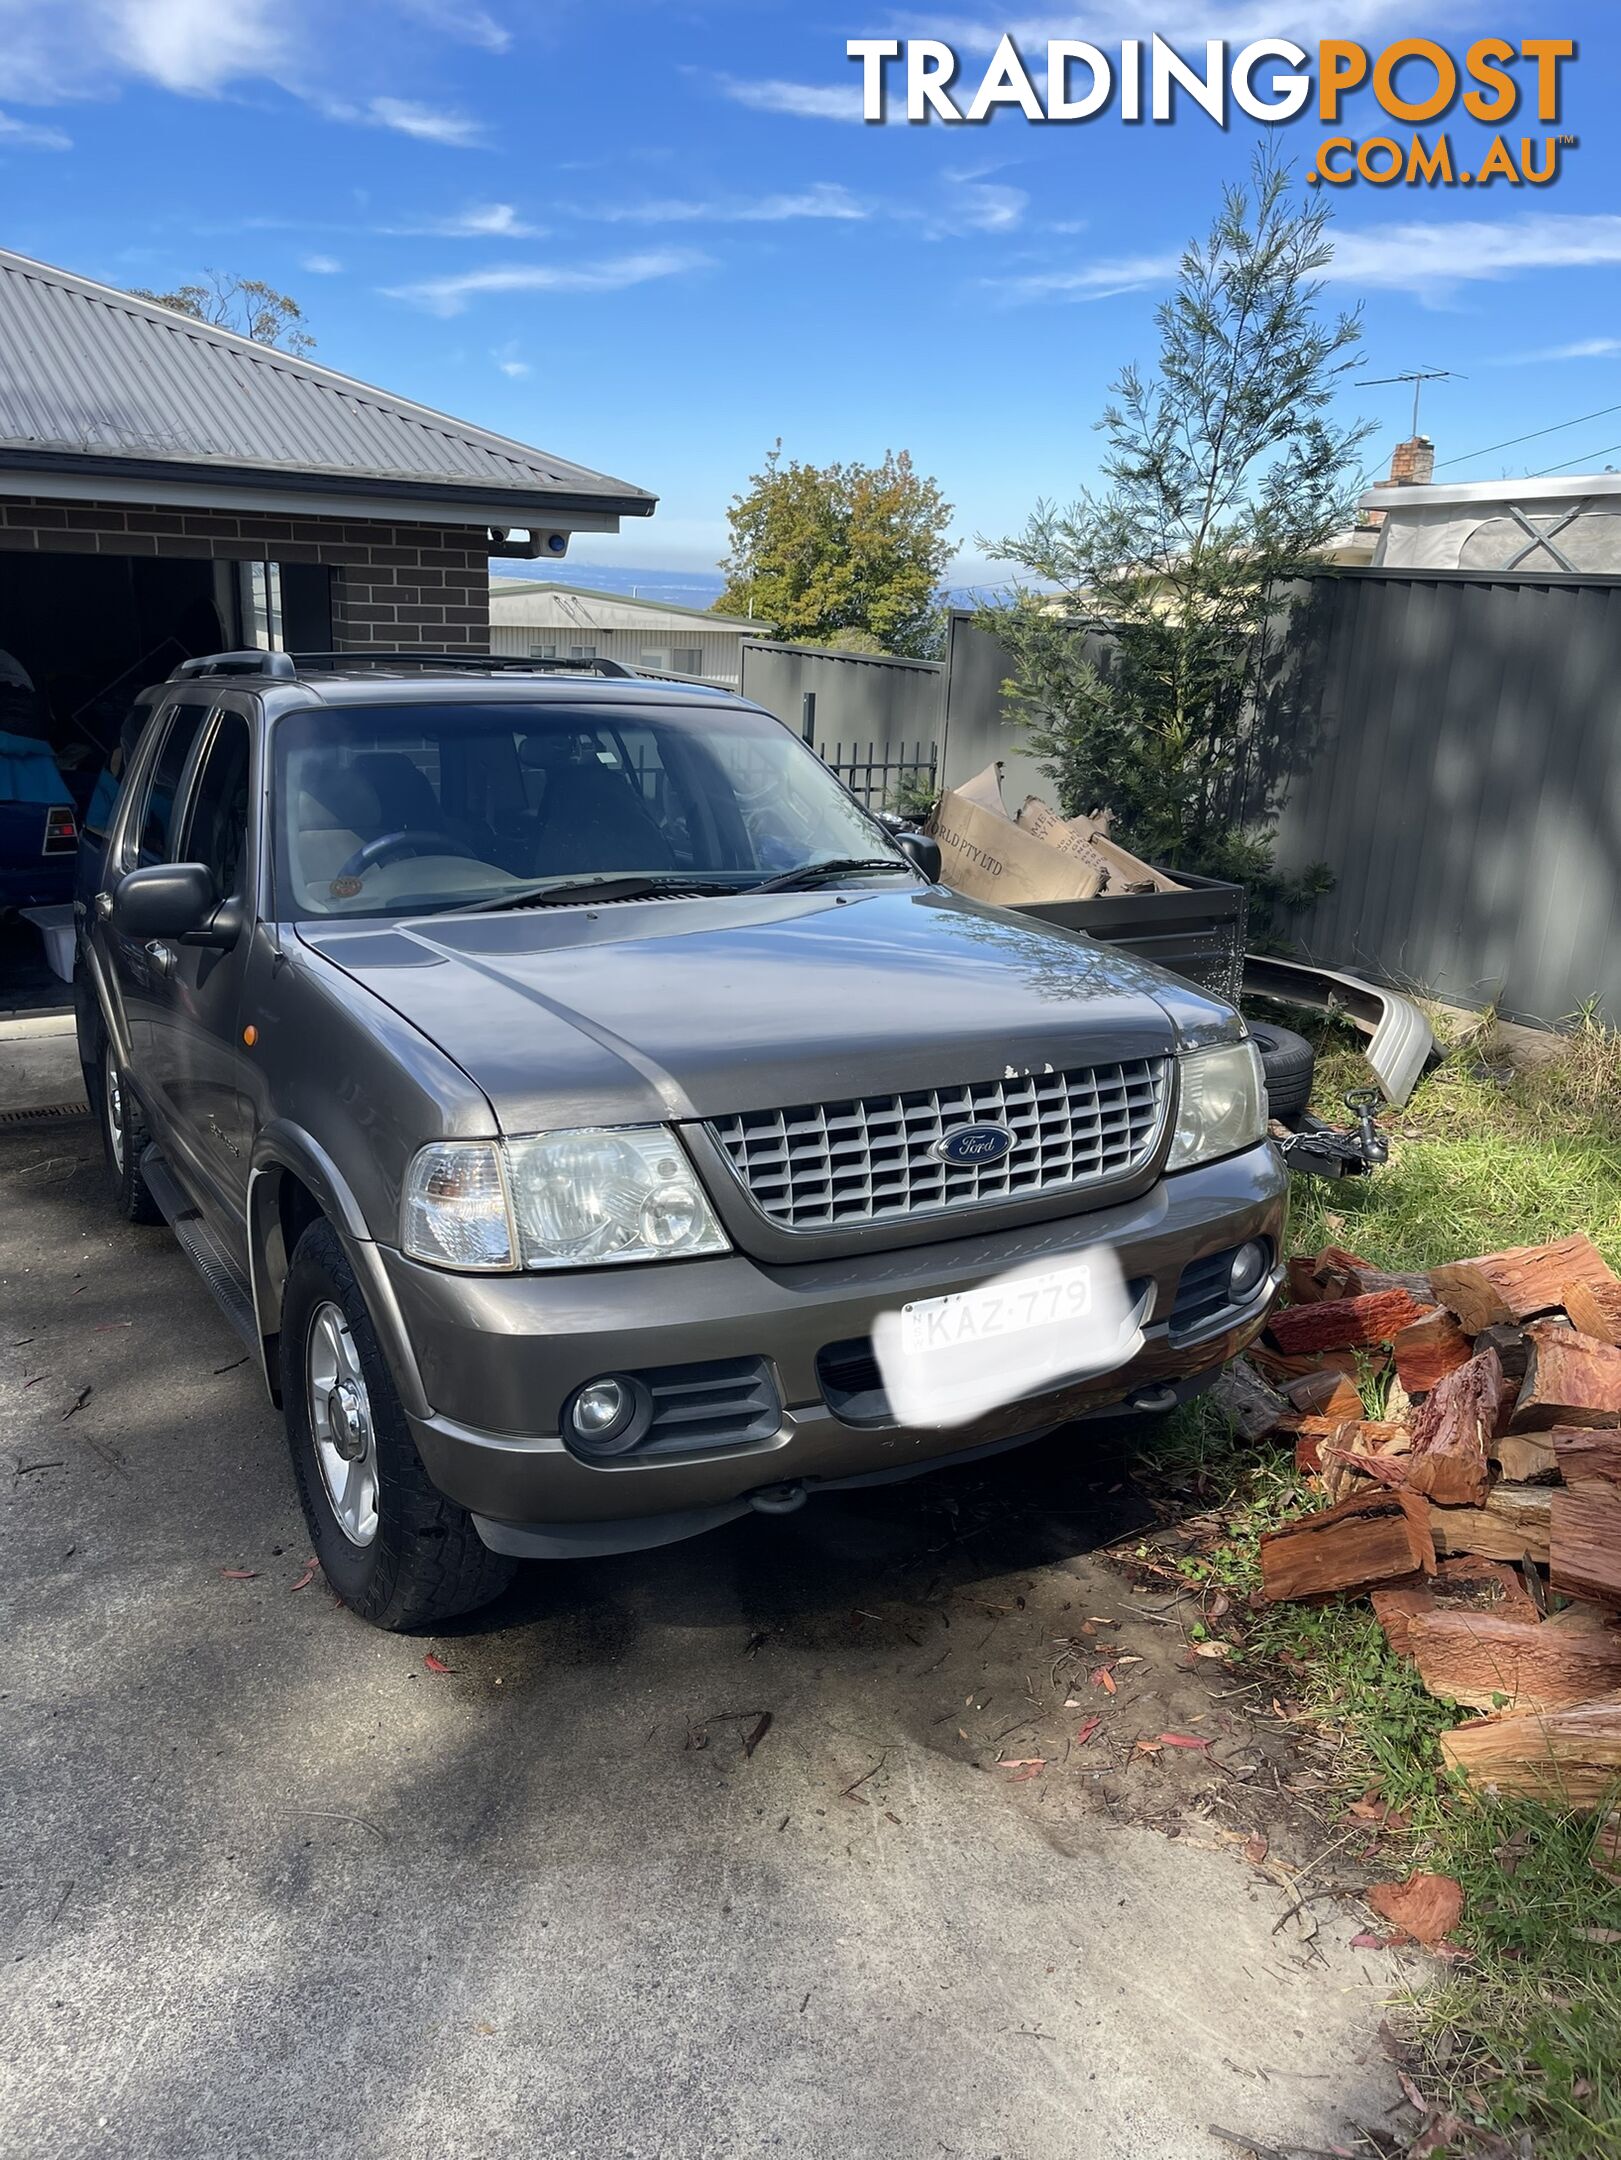 2002 Ford Explorer SUV Automatic